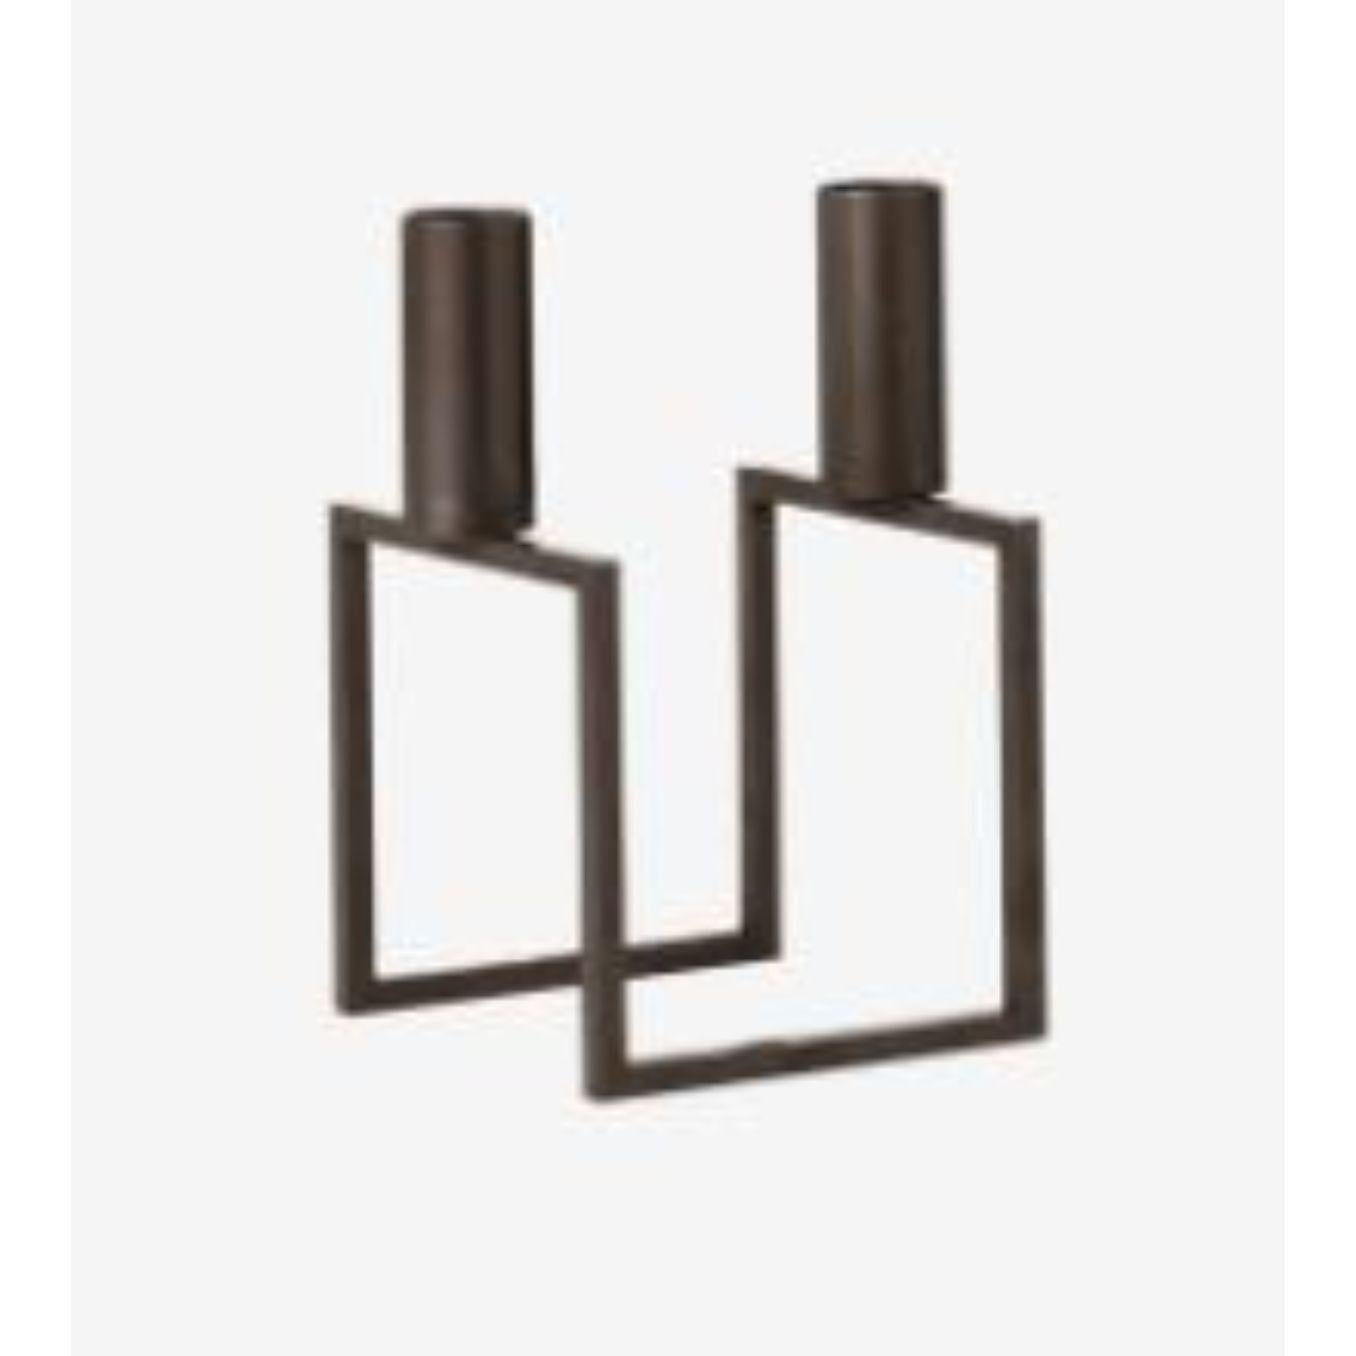 Burnished copper line candle holder by Lassen
Dimensions: D 10 x W 10 x H 16 cm 
Materials: Metal 
Also available in different dimensions. 
Weight: 0.60 Kg

With a sharp sense of contemporary Functionalist style, Mogens Lassen designed the